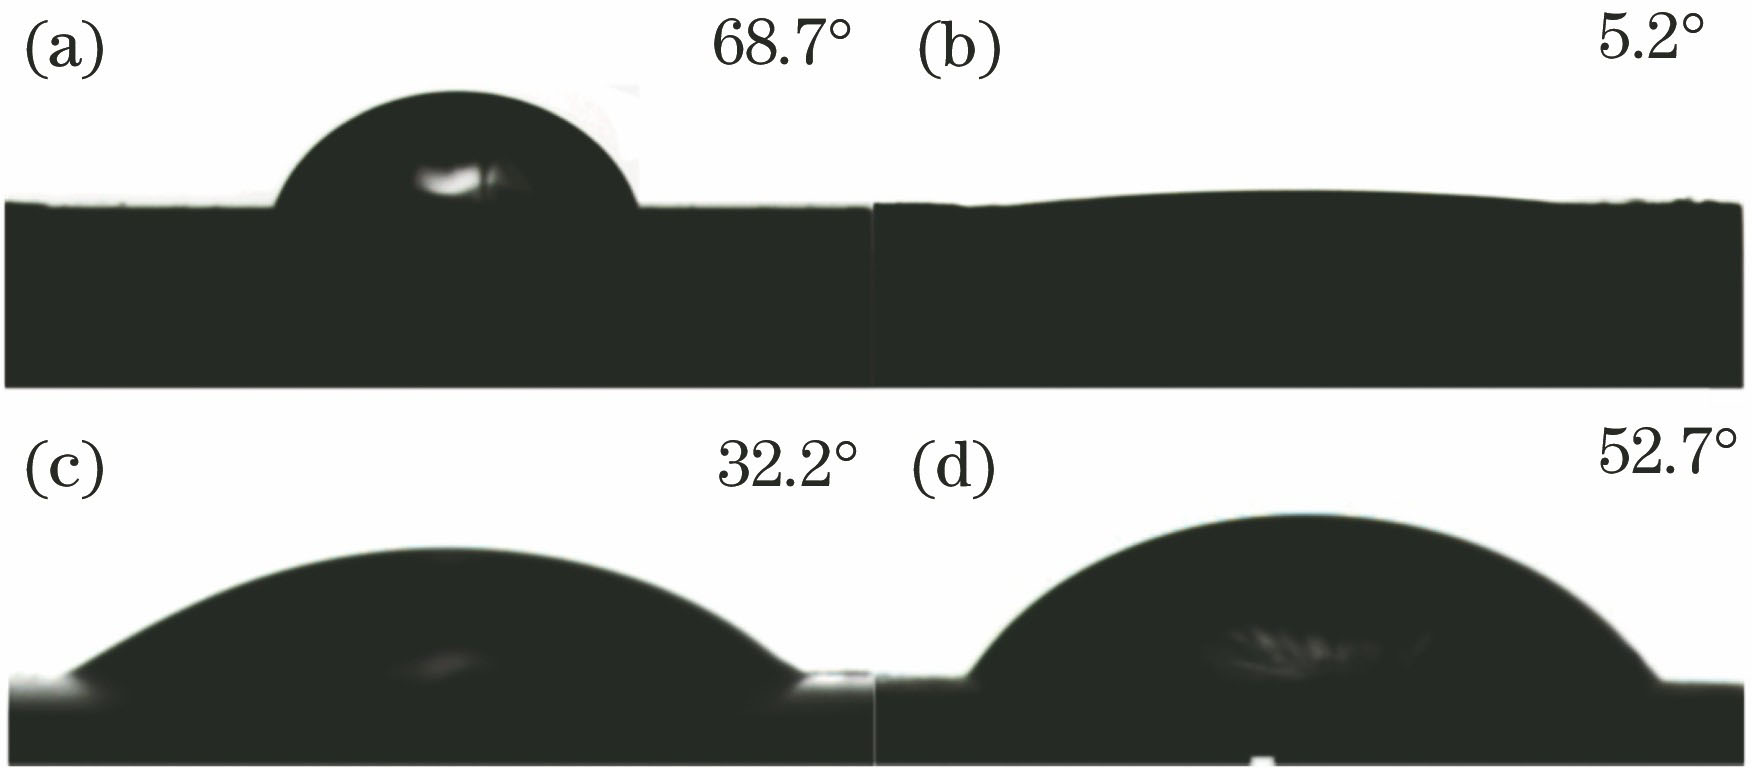 Measurement images of contact angle of water droplets before, directly after fabrication, and three months after fabrication. (a) Unpolished surface; (b) linear structure surface; (c) unpolished surface after 3 months; (d) surface of the linear structure after 3 months